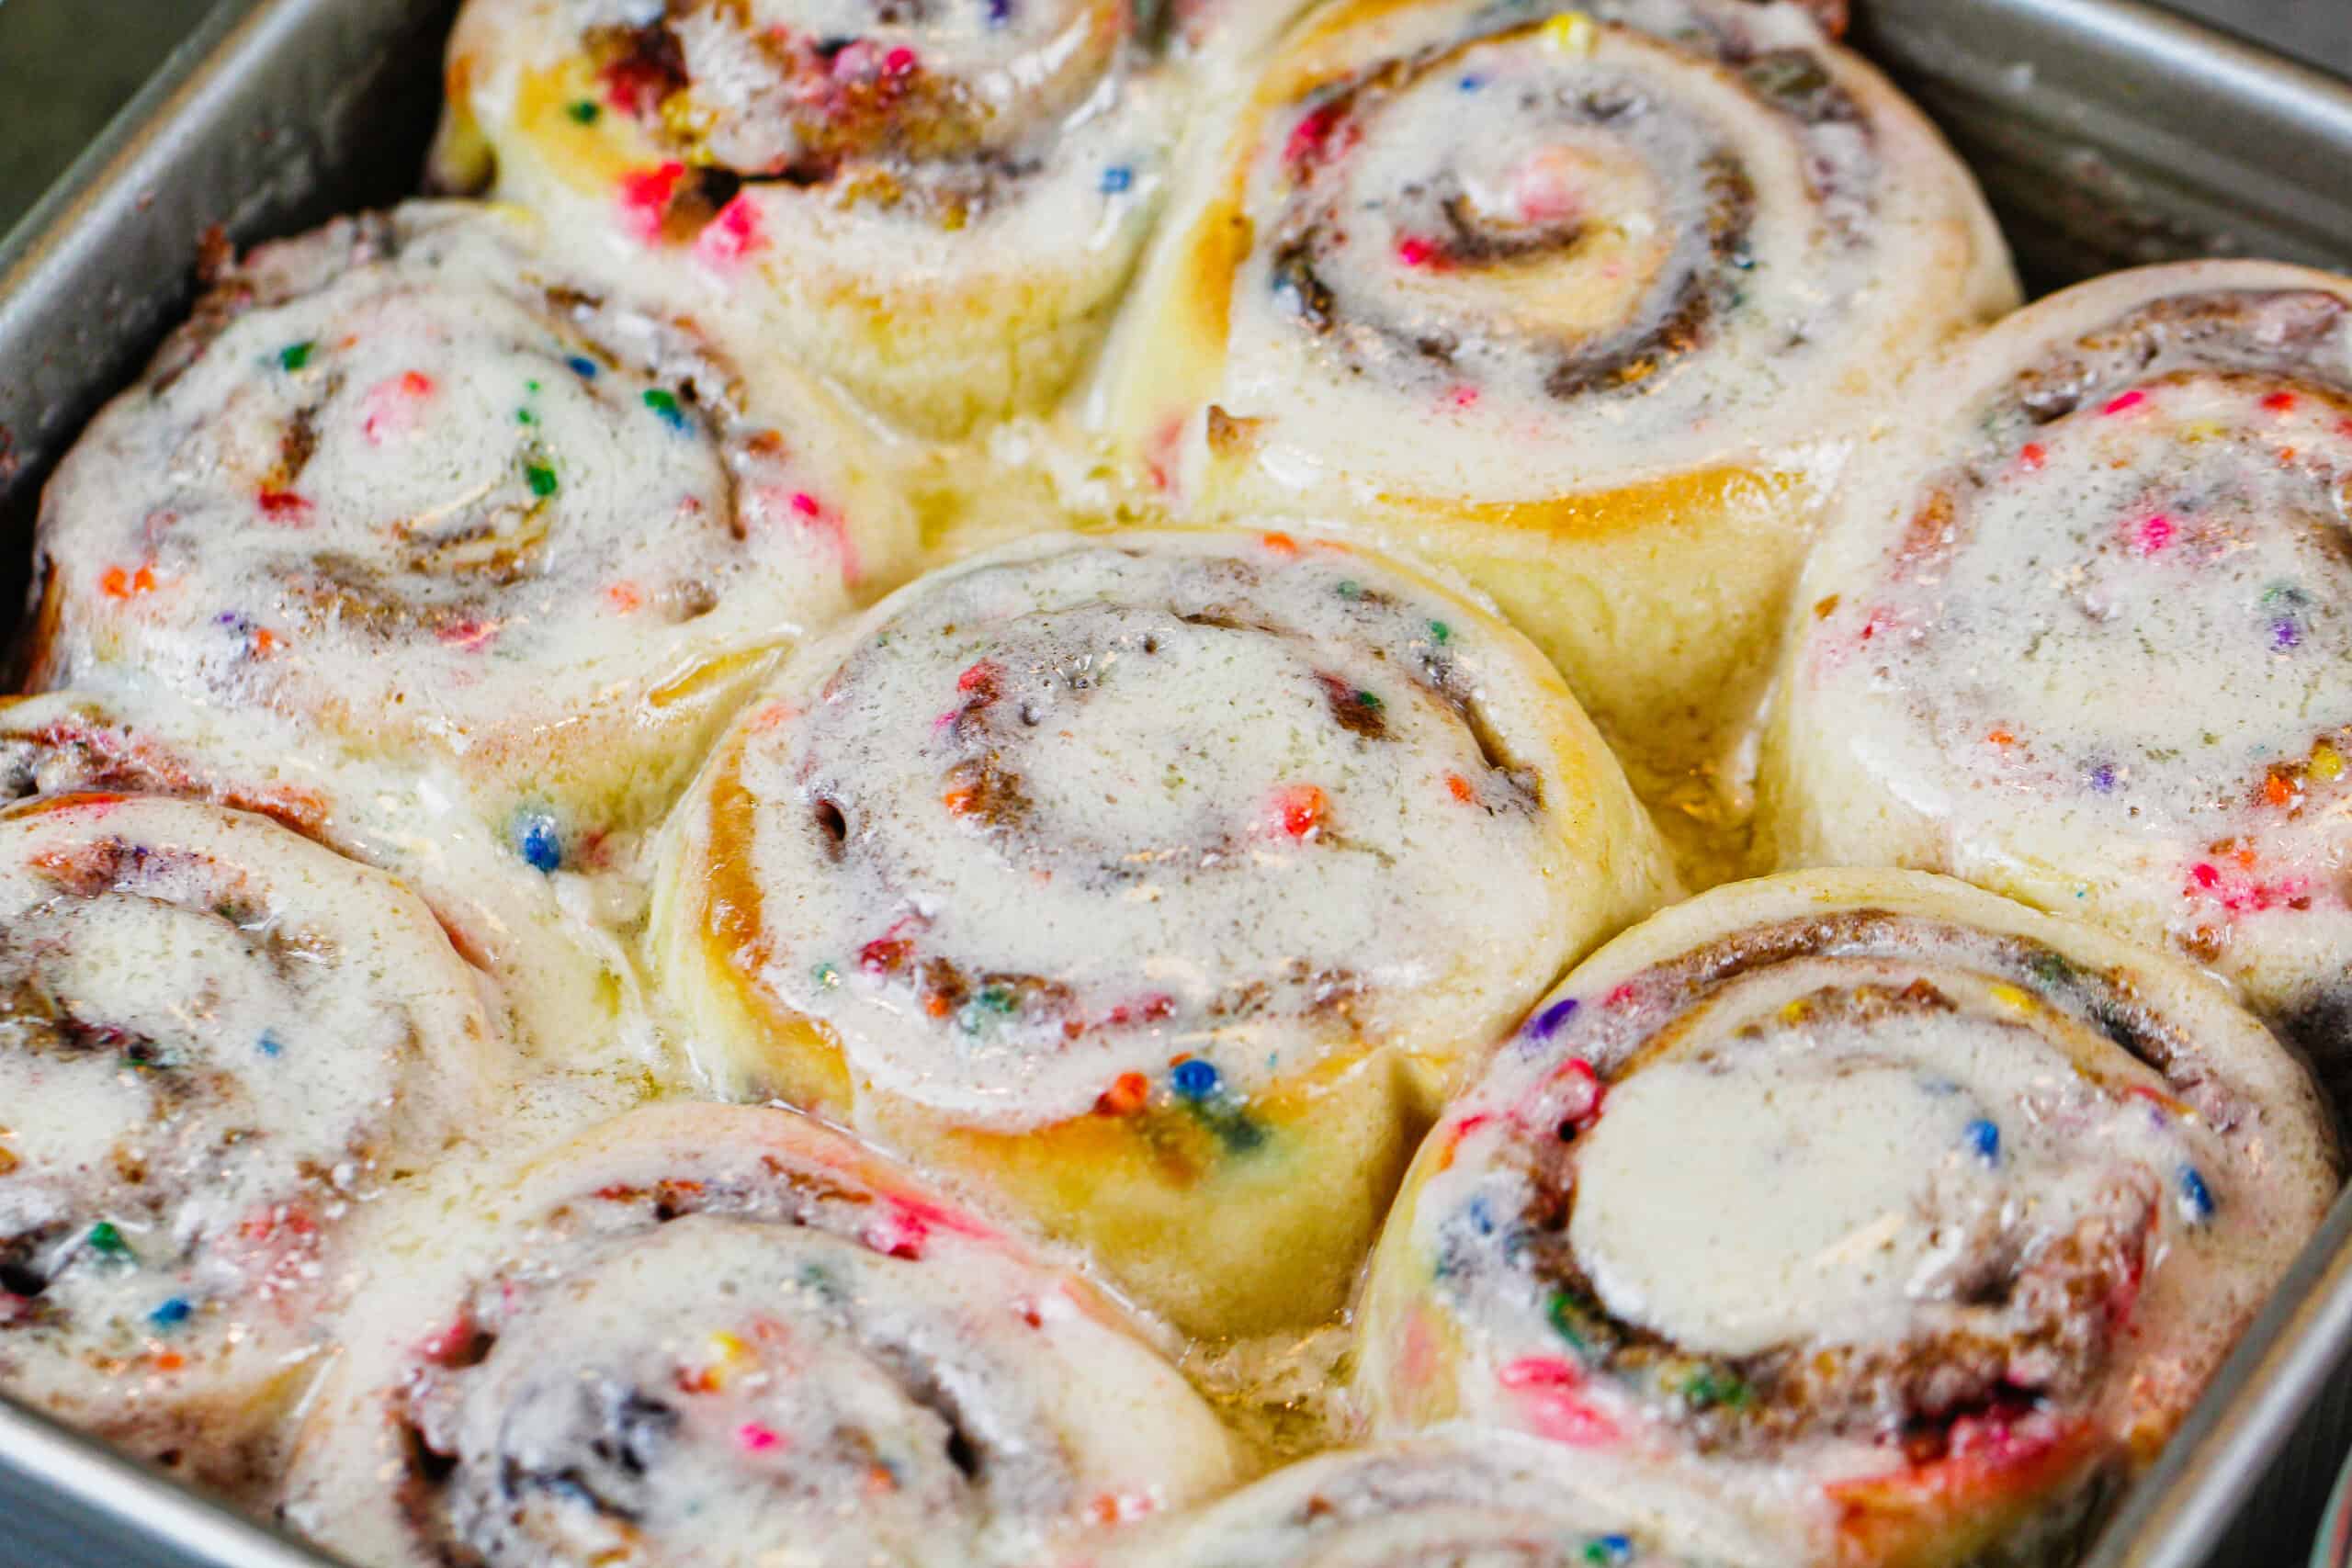 image of warm funfetti sprinkle cinnamon rolls fresh out of the oven with melting frosting